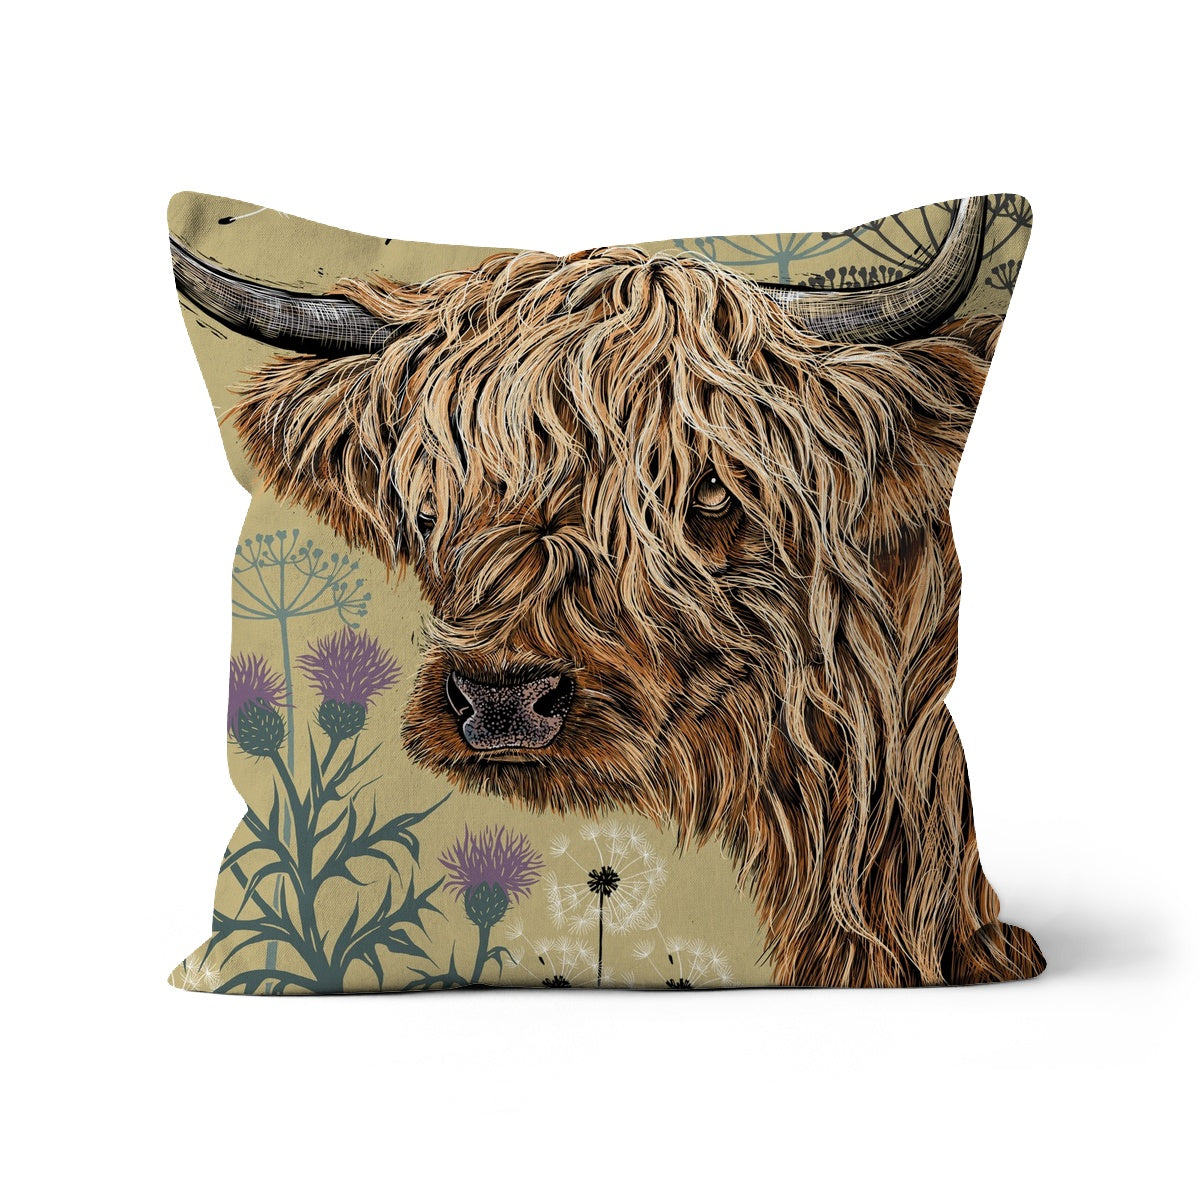 Highland Cow cushion in Moss, by Fox and Boo